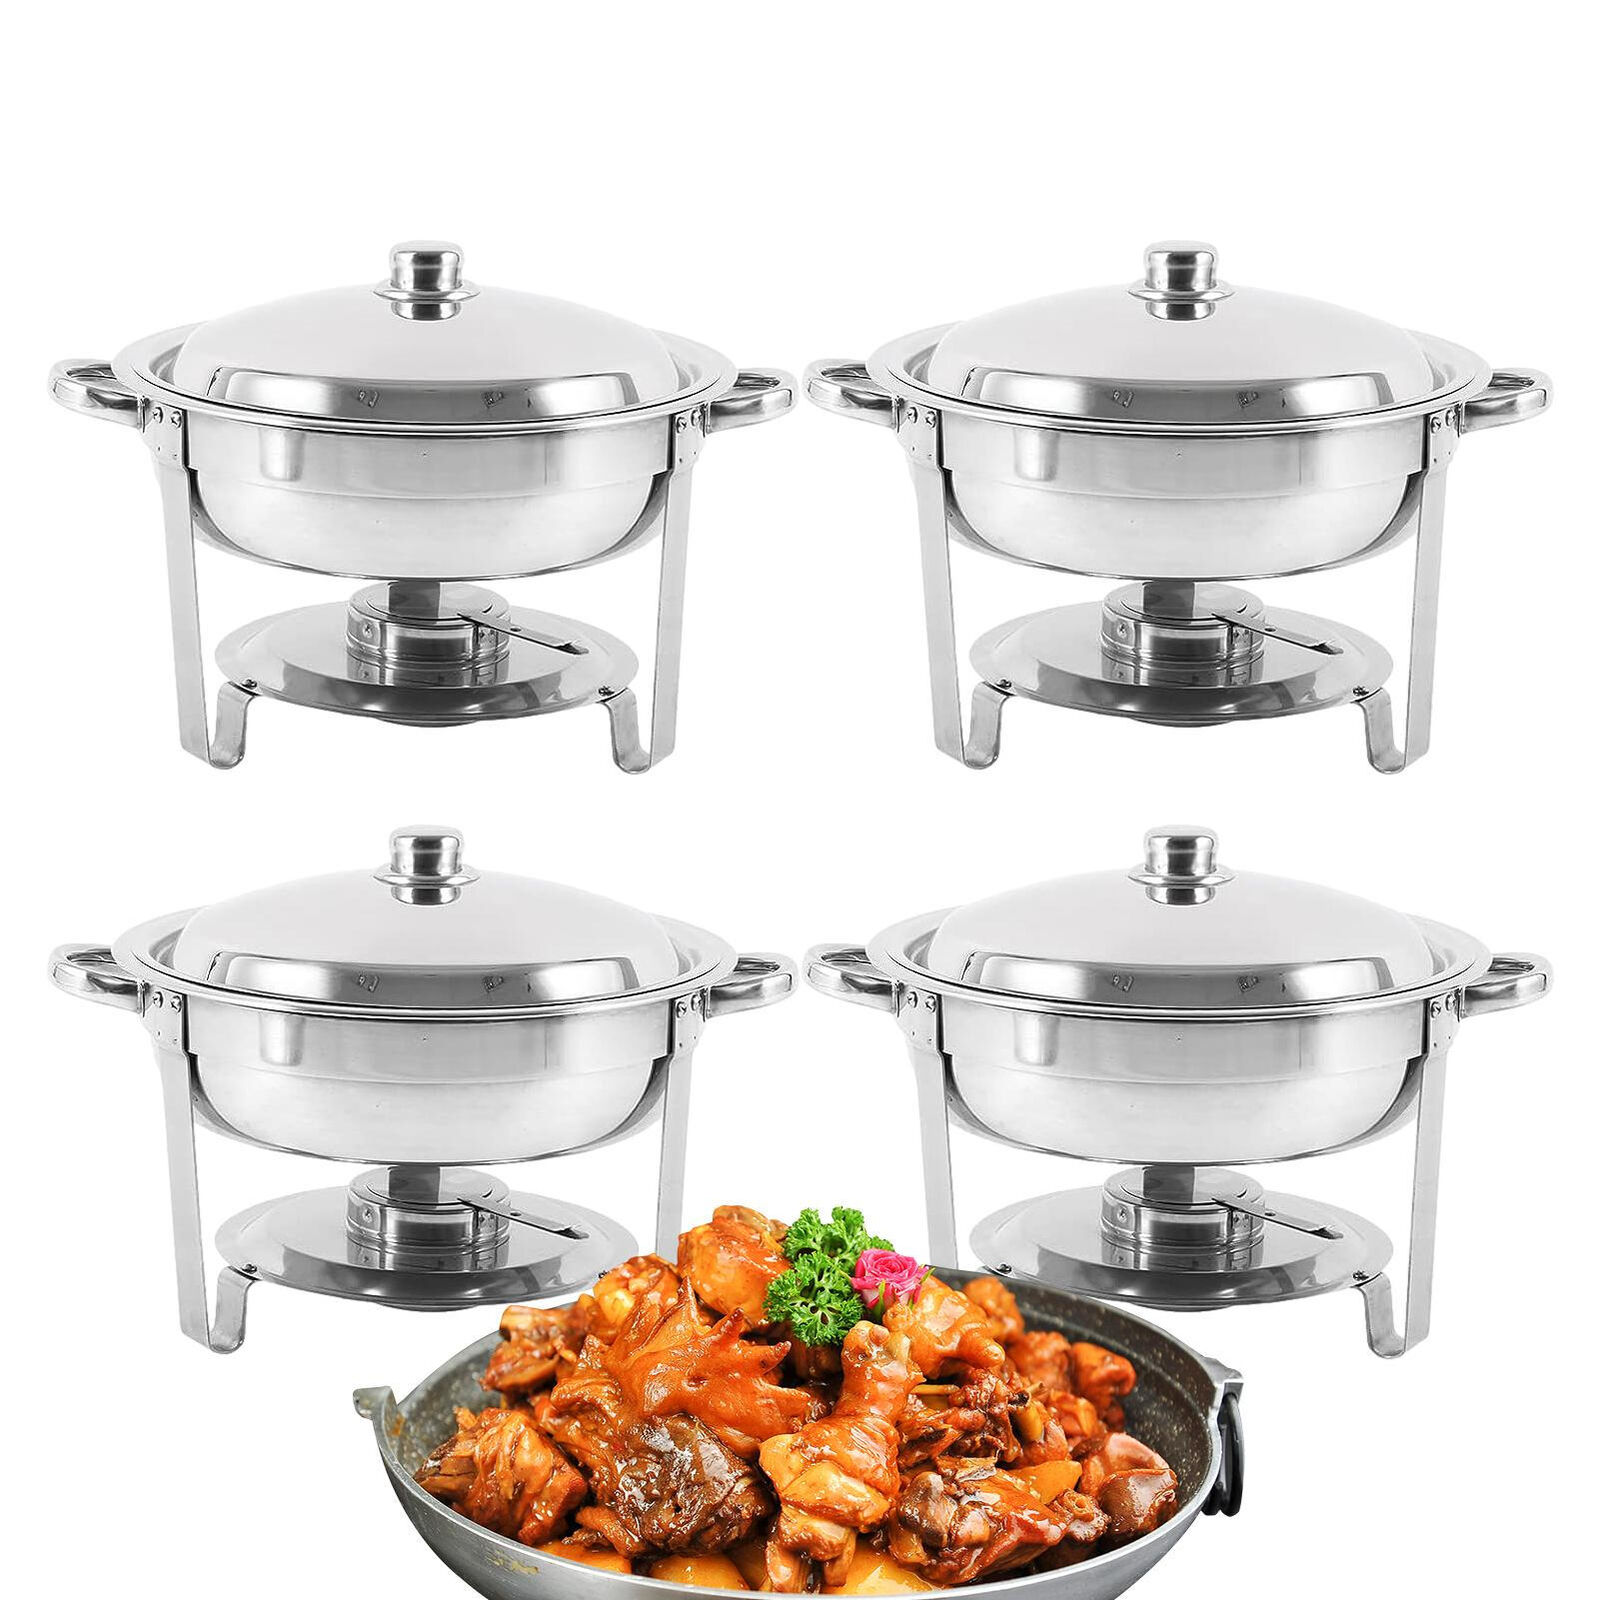 Round Chafing Dish Buffet Set 5Qt 4pc Stainless Steel Buffet Servers and Warmers